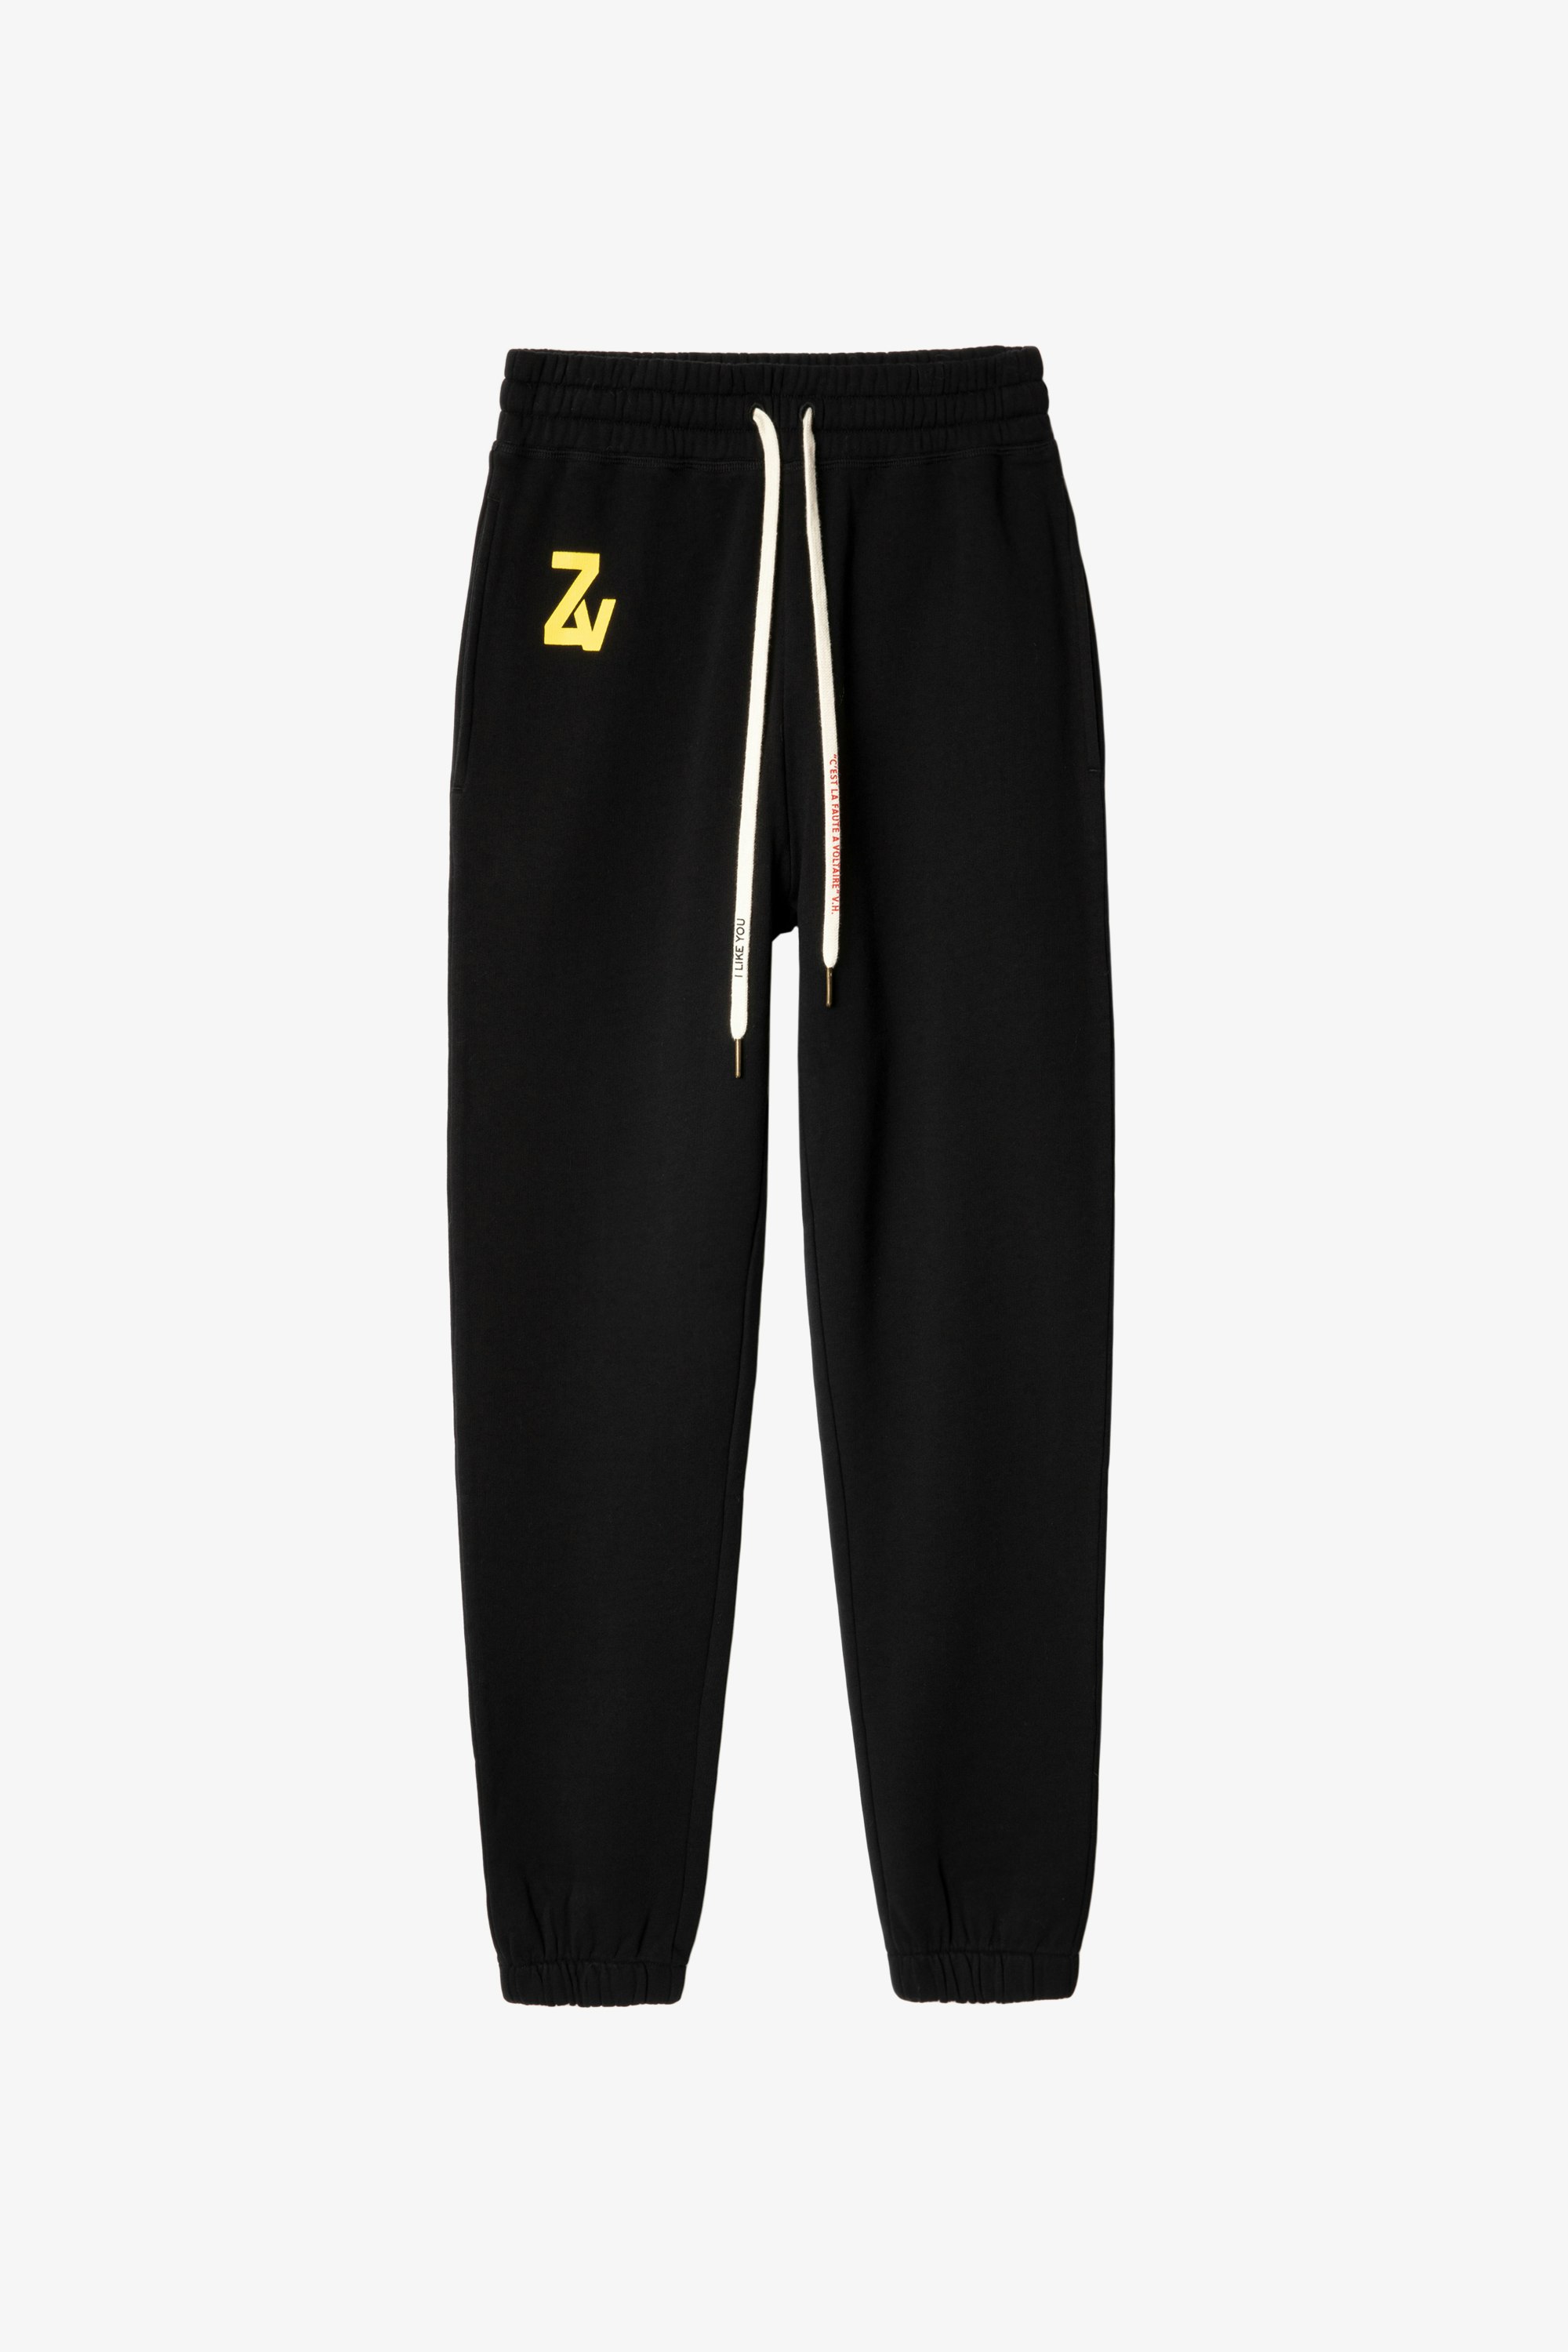 Steevy Trackpants Woman’s black tracksuit bottoms